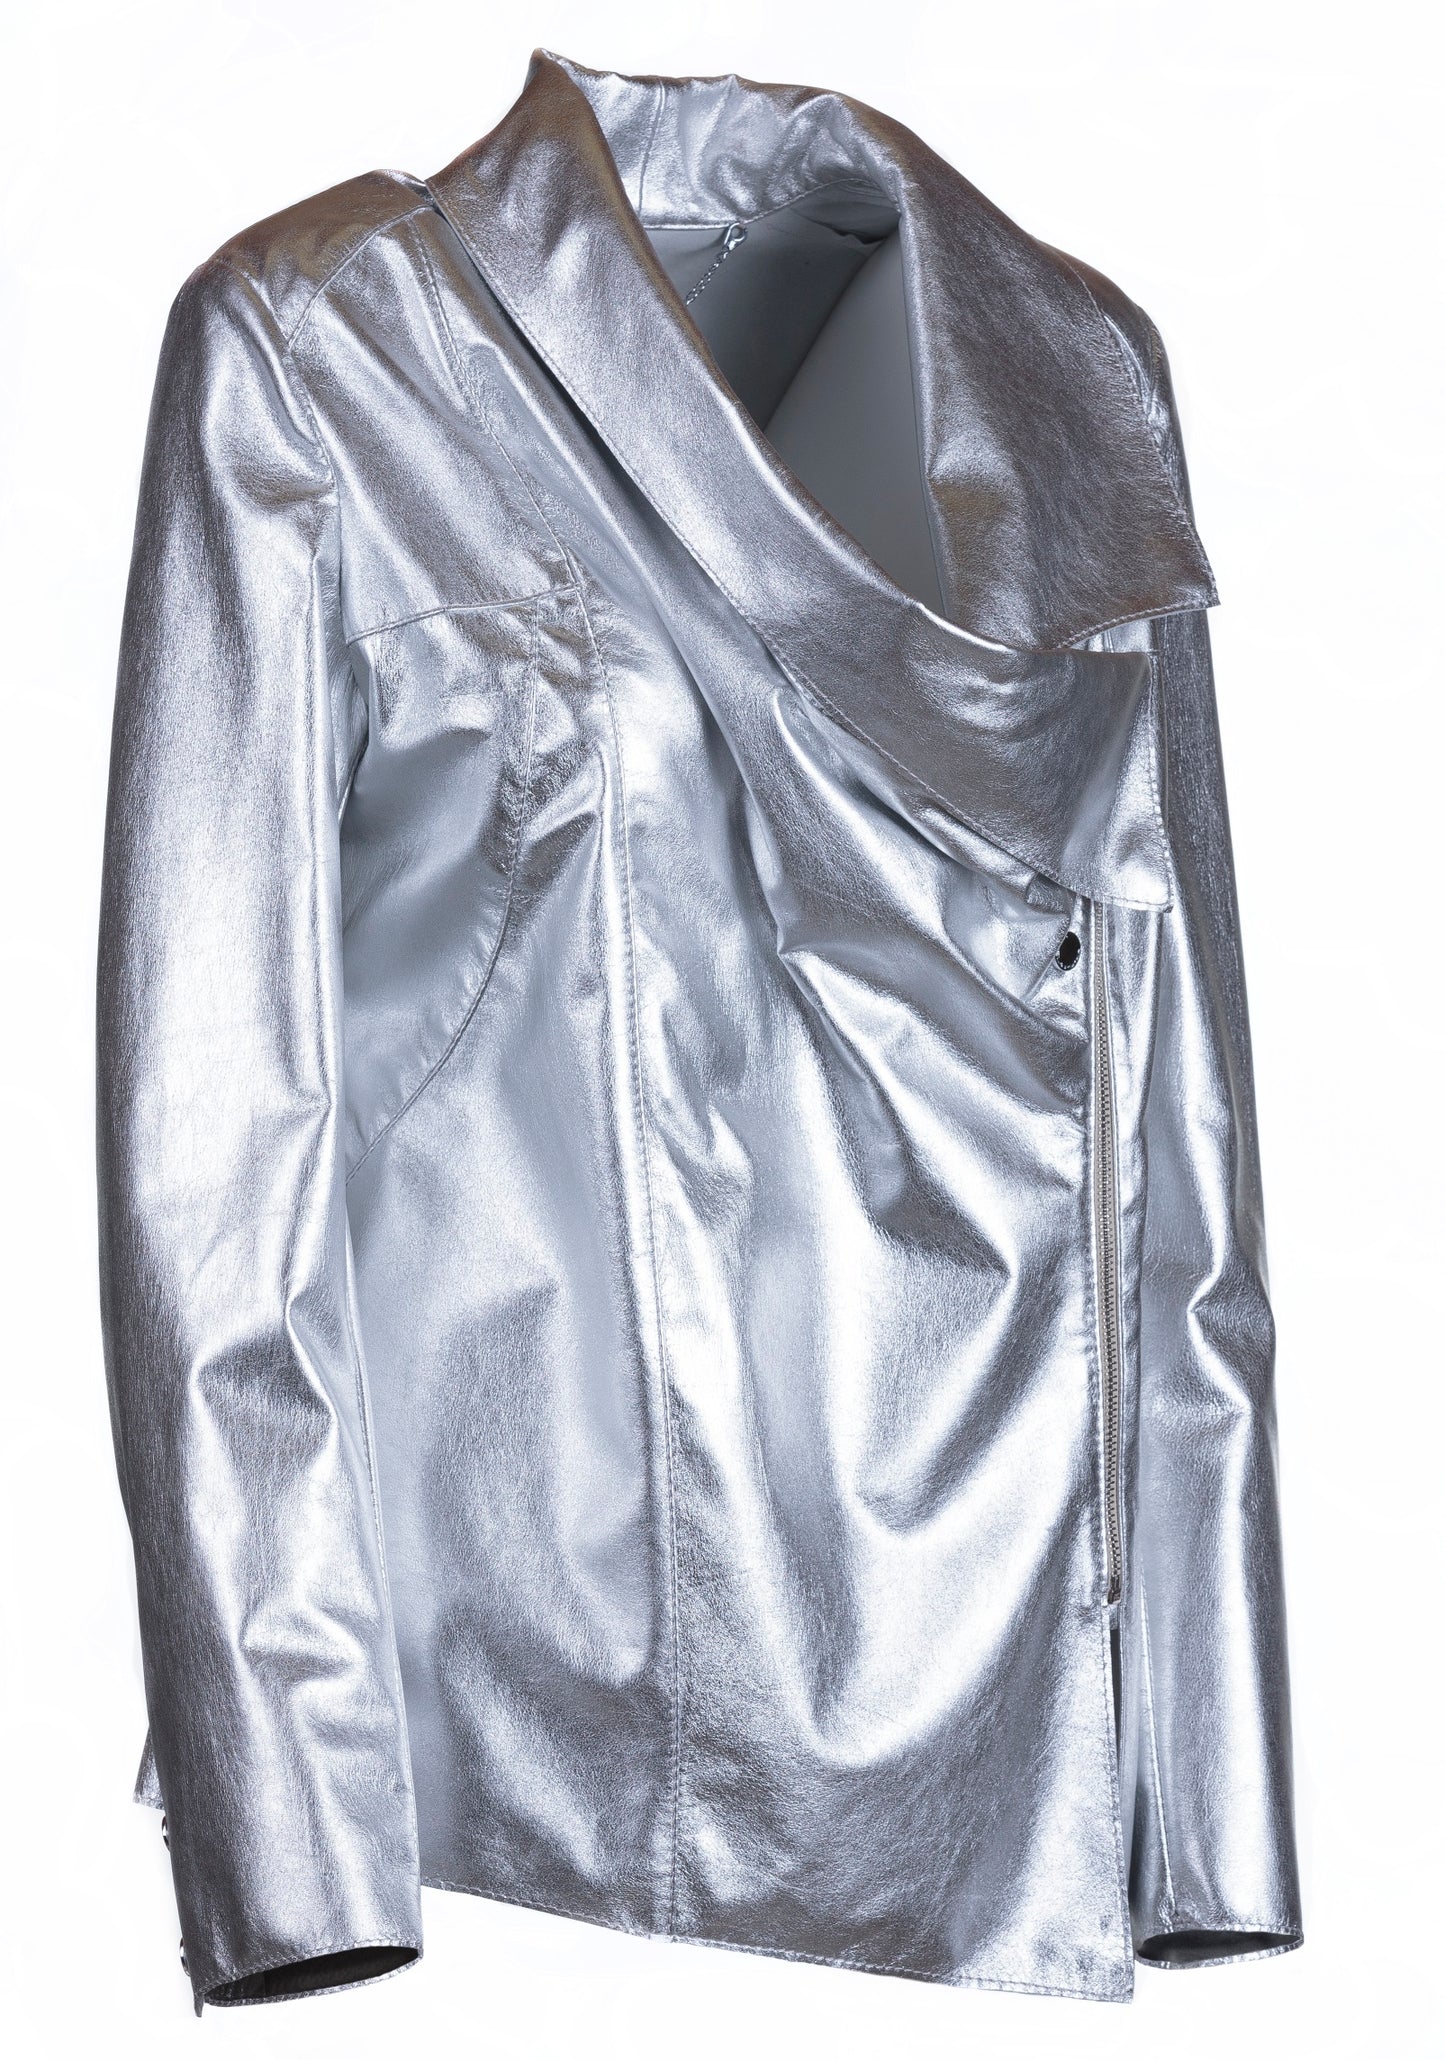 Draped Reindeer Leather Jacket -  Limited Edition